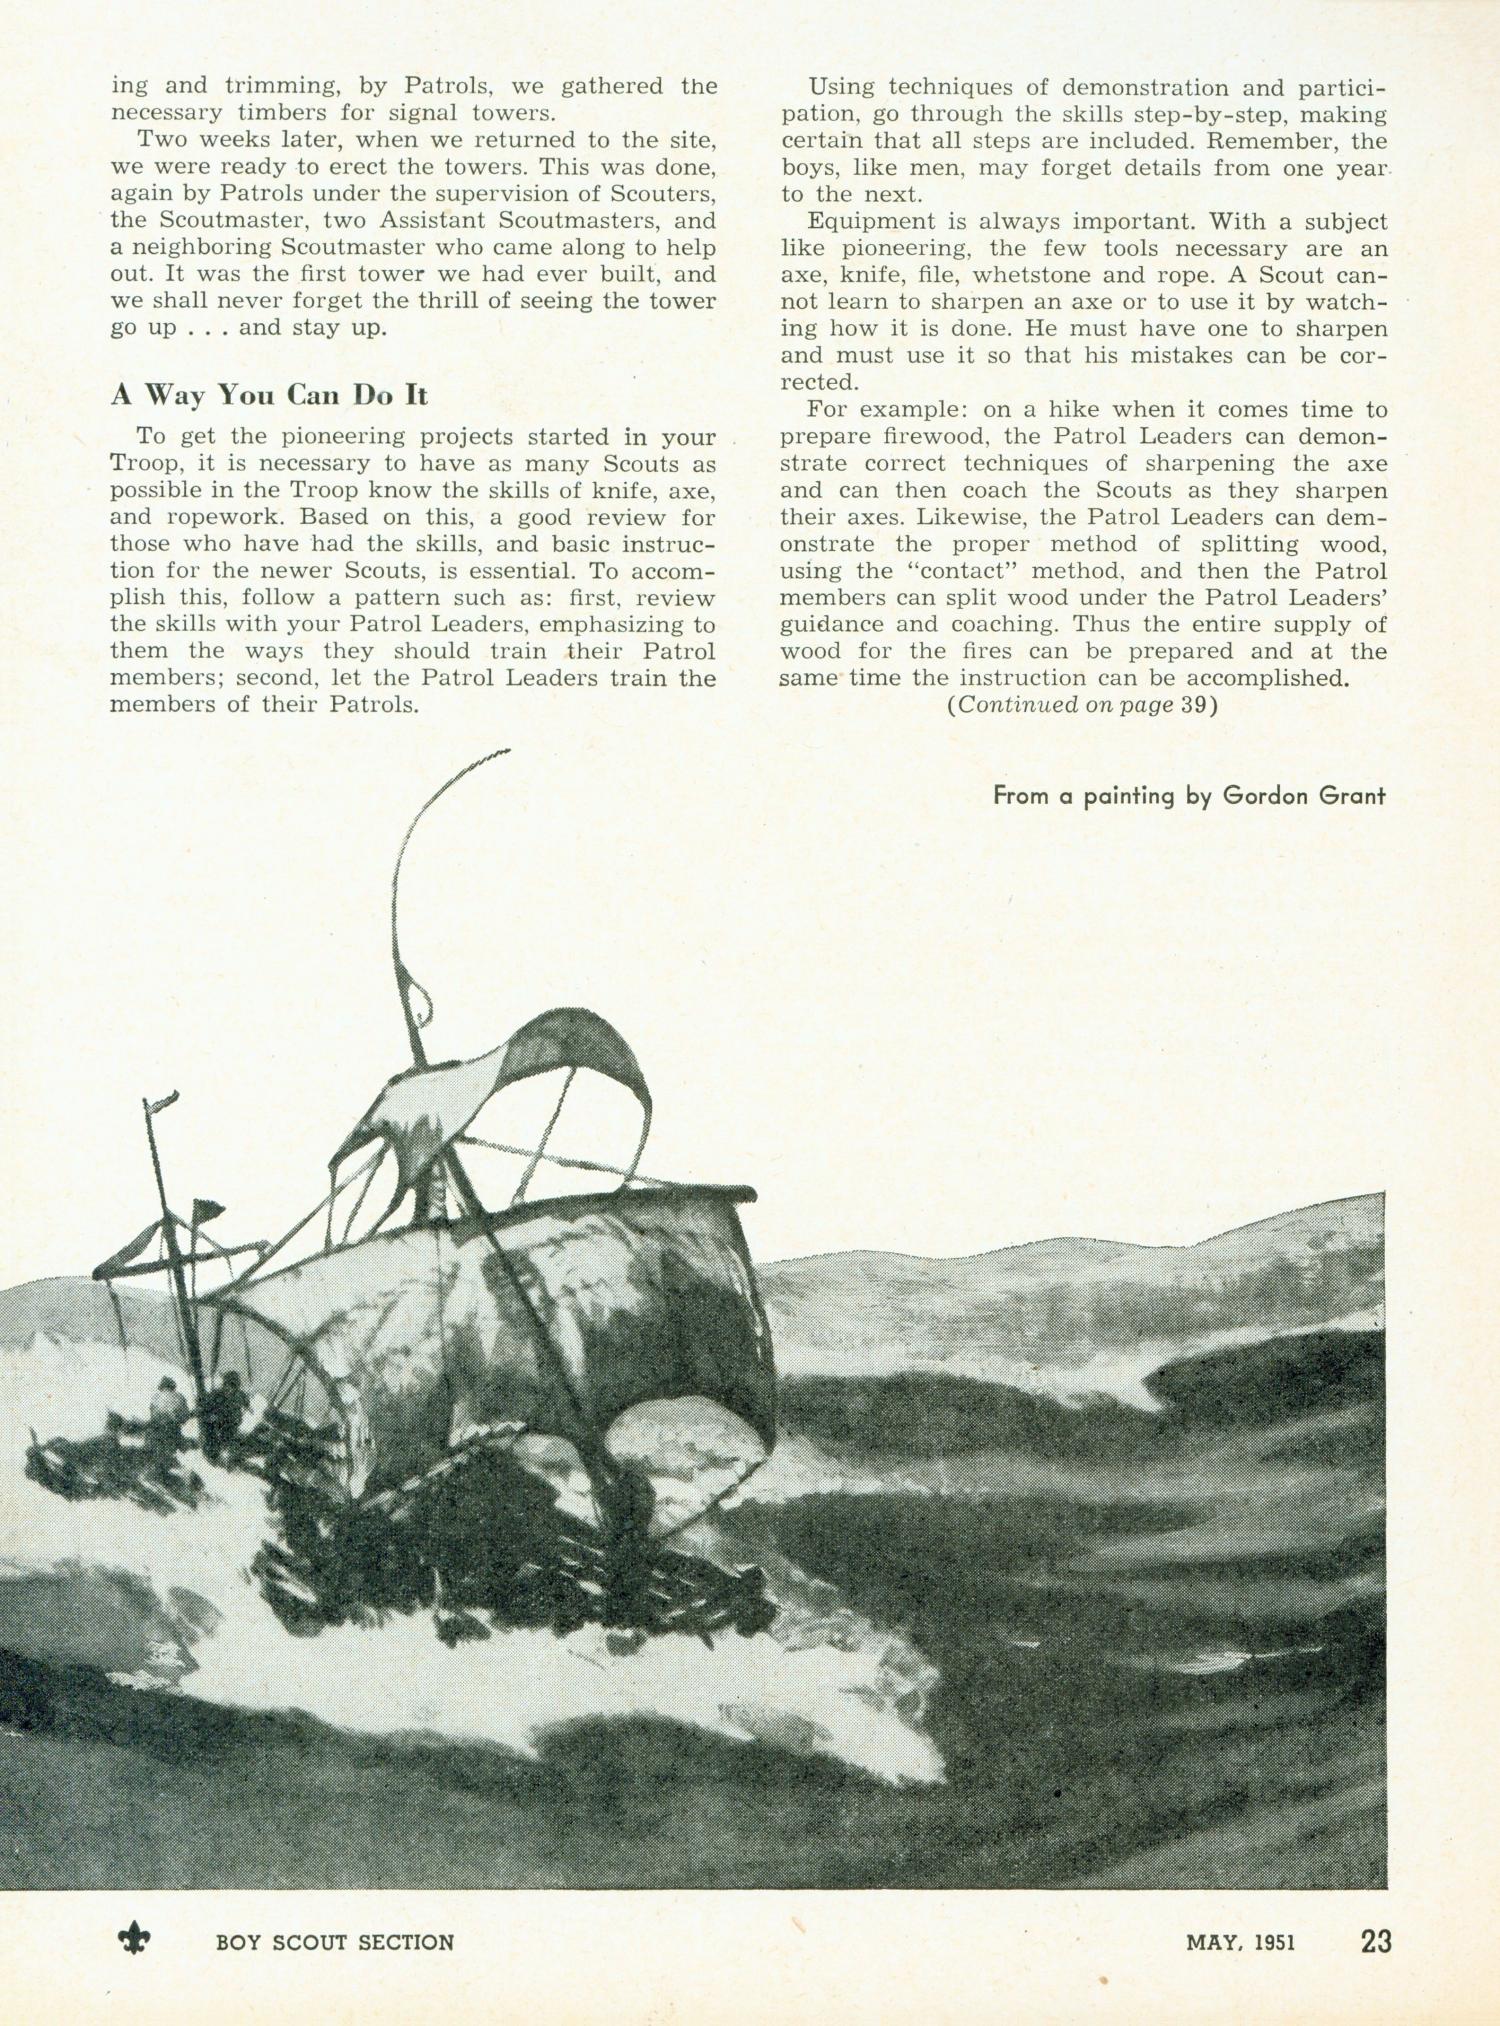 Scouting, Volume 39, Number 5, May 1951
                                                
                                                    23
                                                